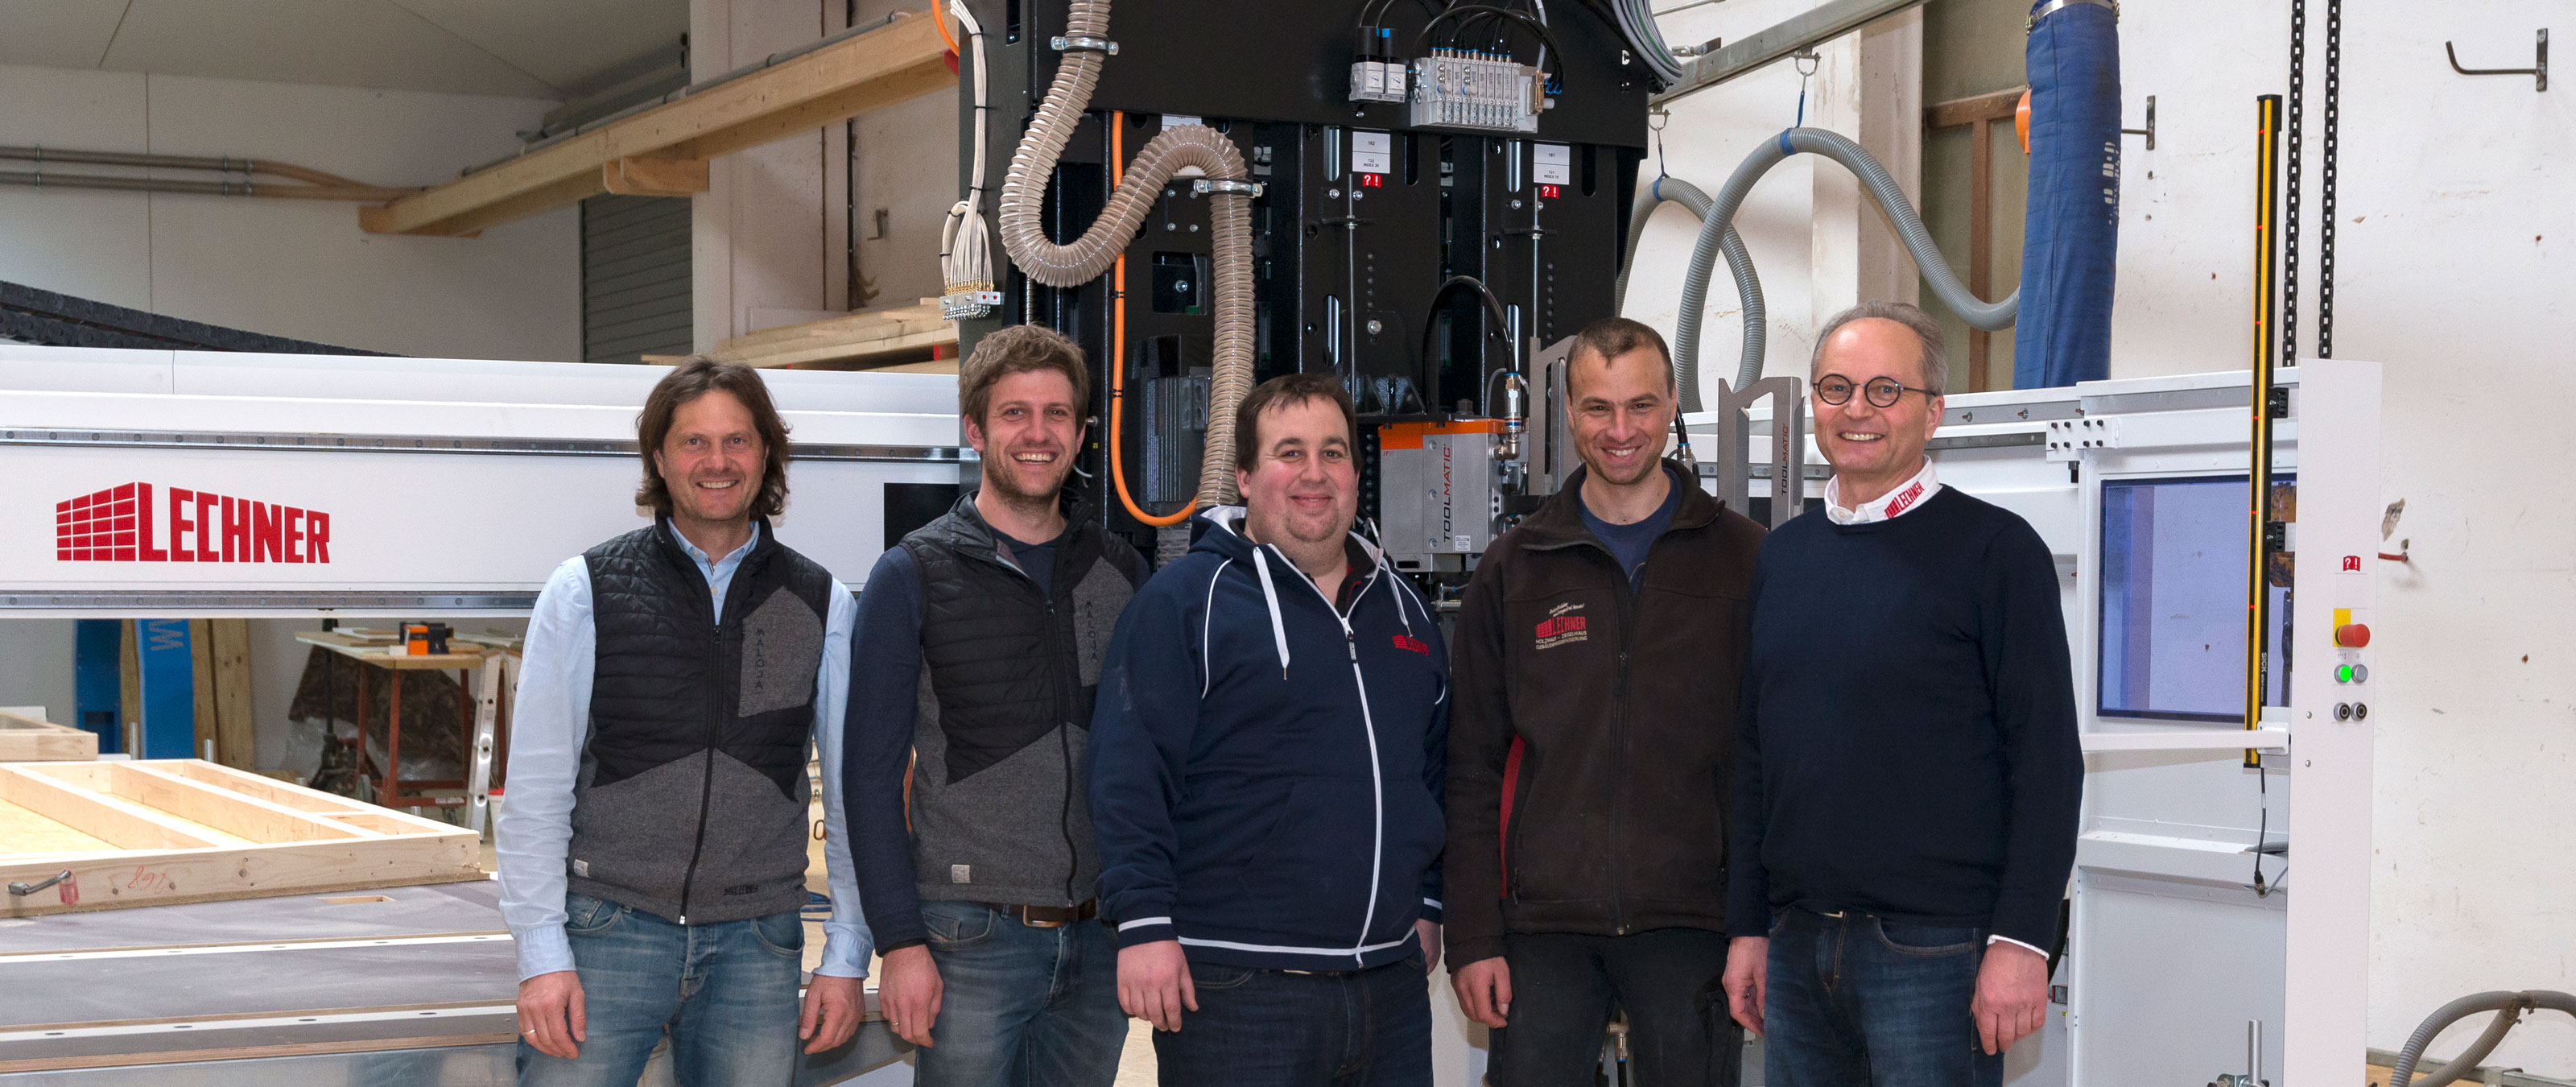 The Lechner employees are proud of their new WALLTEQ M-120 multifunction bridge